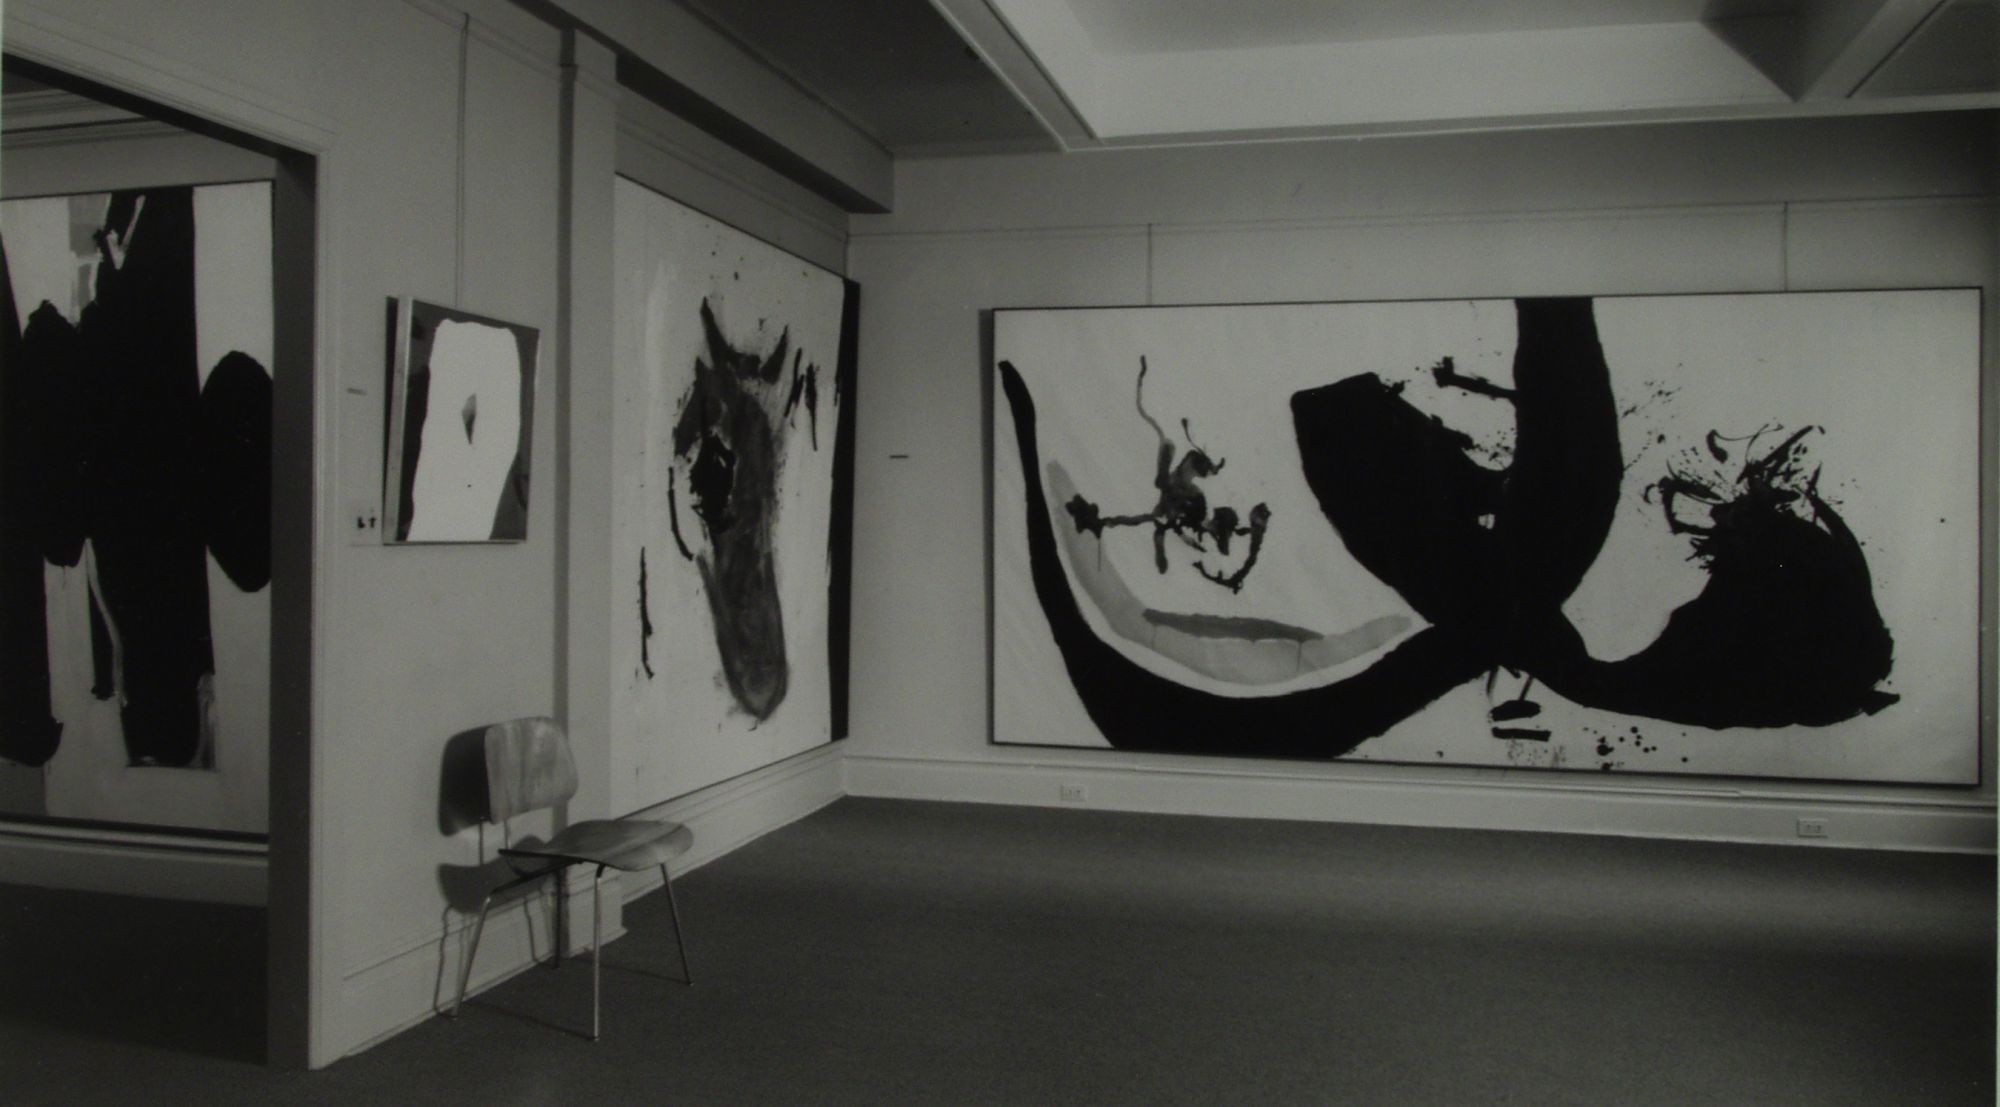 Installation view of Robert Motherwell at the Sidney Janis Gallery, April 1961. From left to right: Elegy to the Spanish Republic No. 58,  Greek Collage, Painting, and Black on White